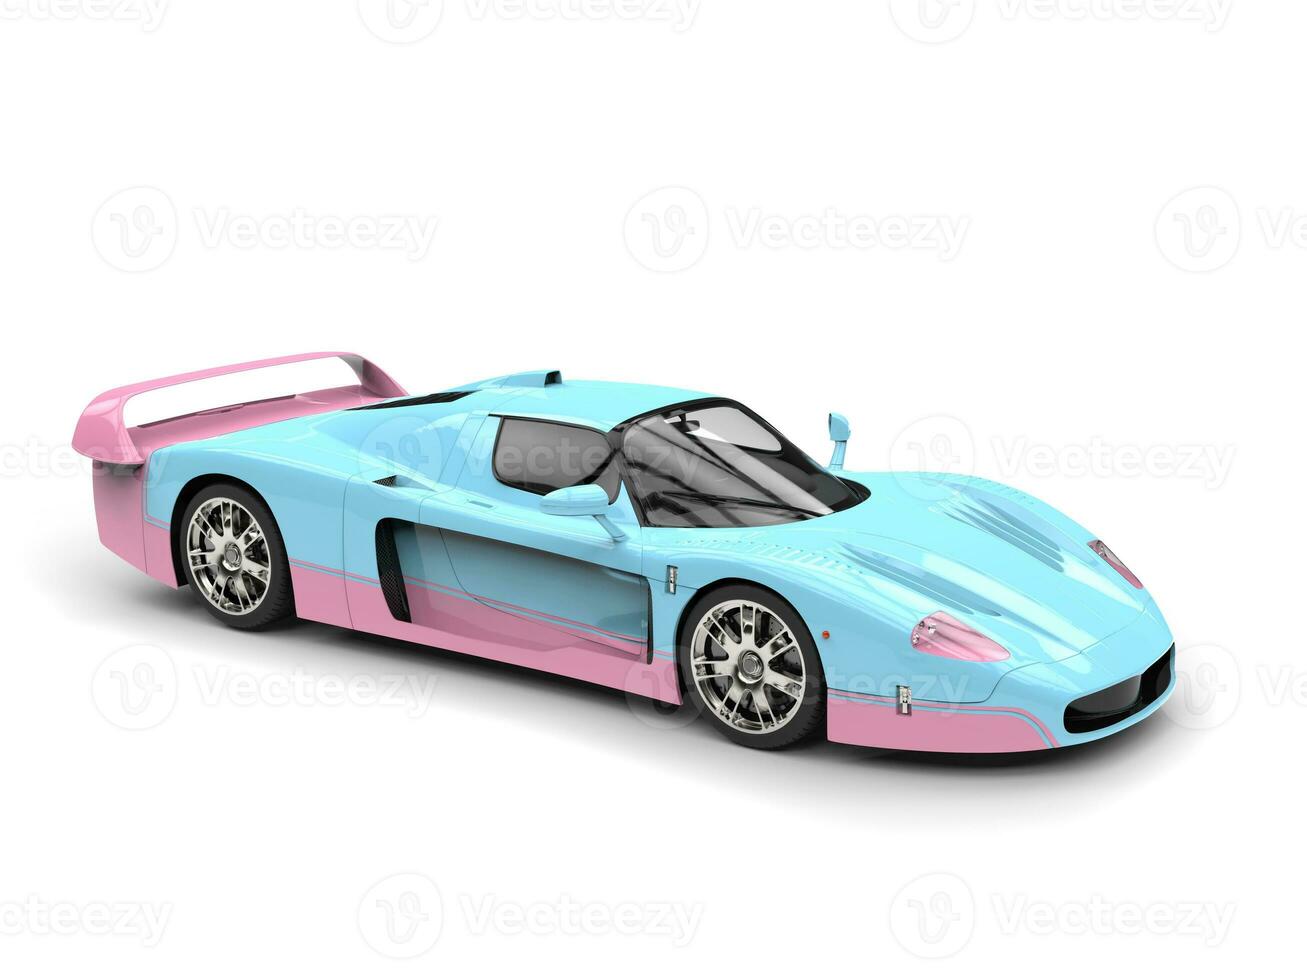 Candy blue and pink concept supercar - 3D Illustration photo